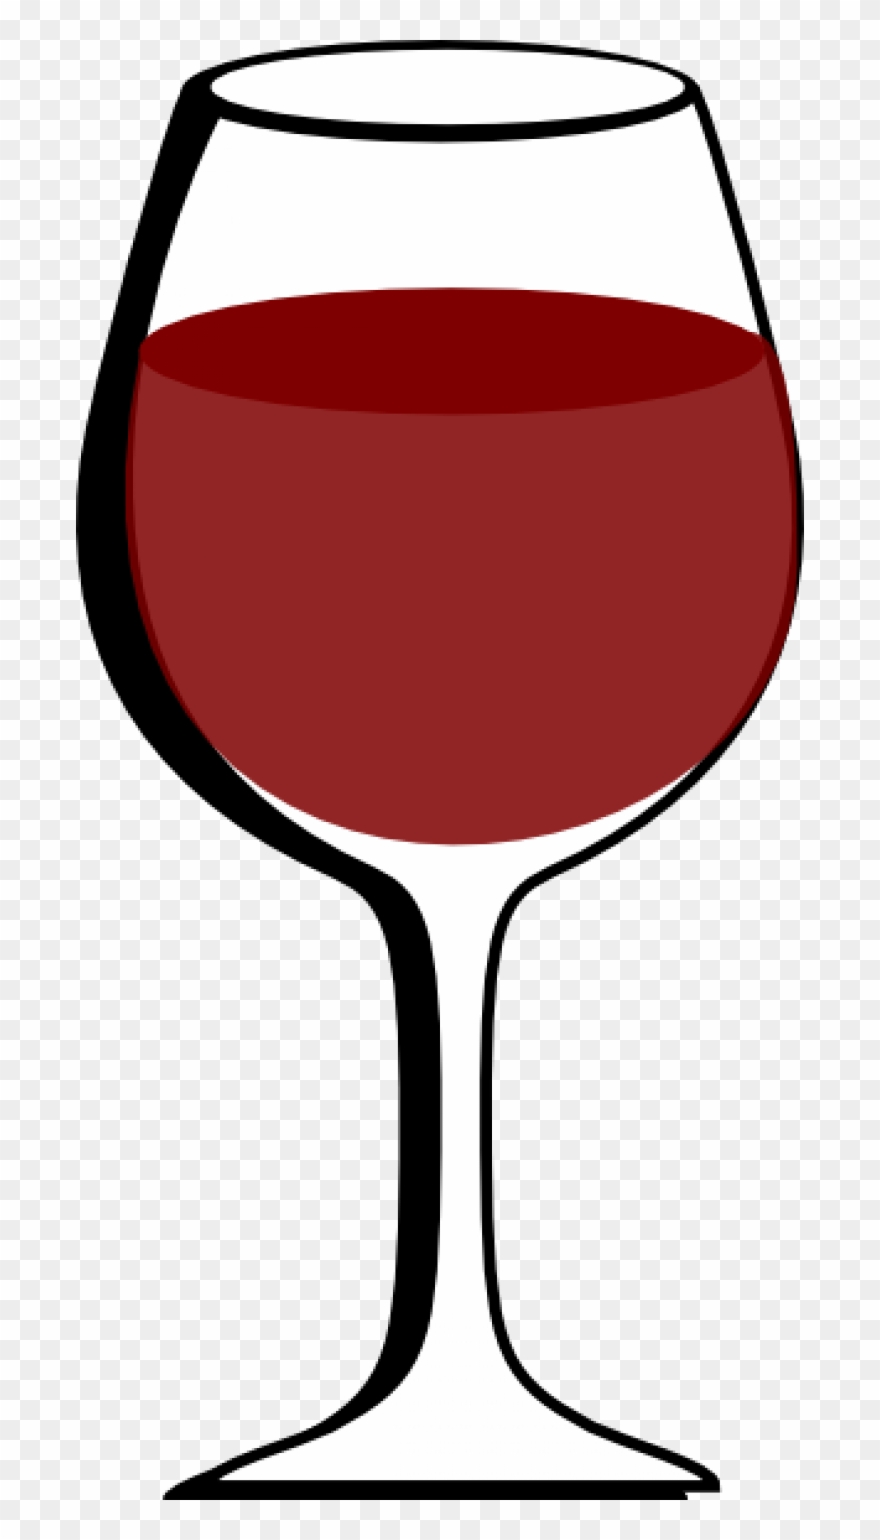 red wine glass clipart - Clip Art Library